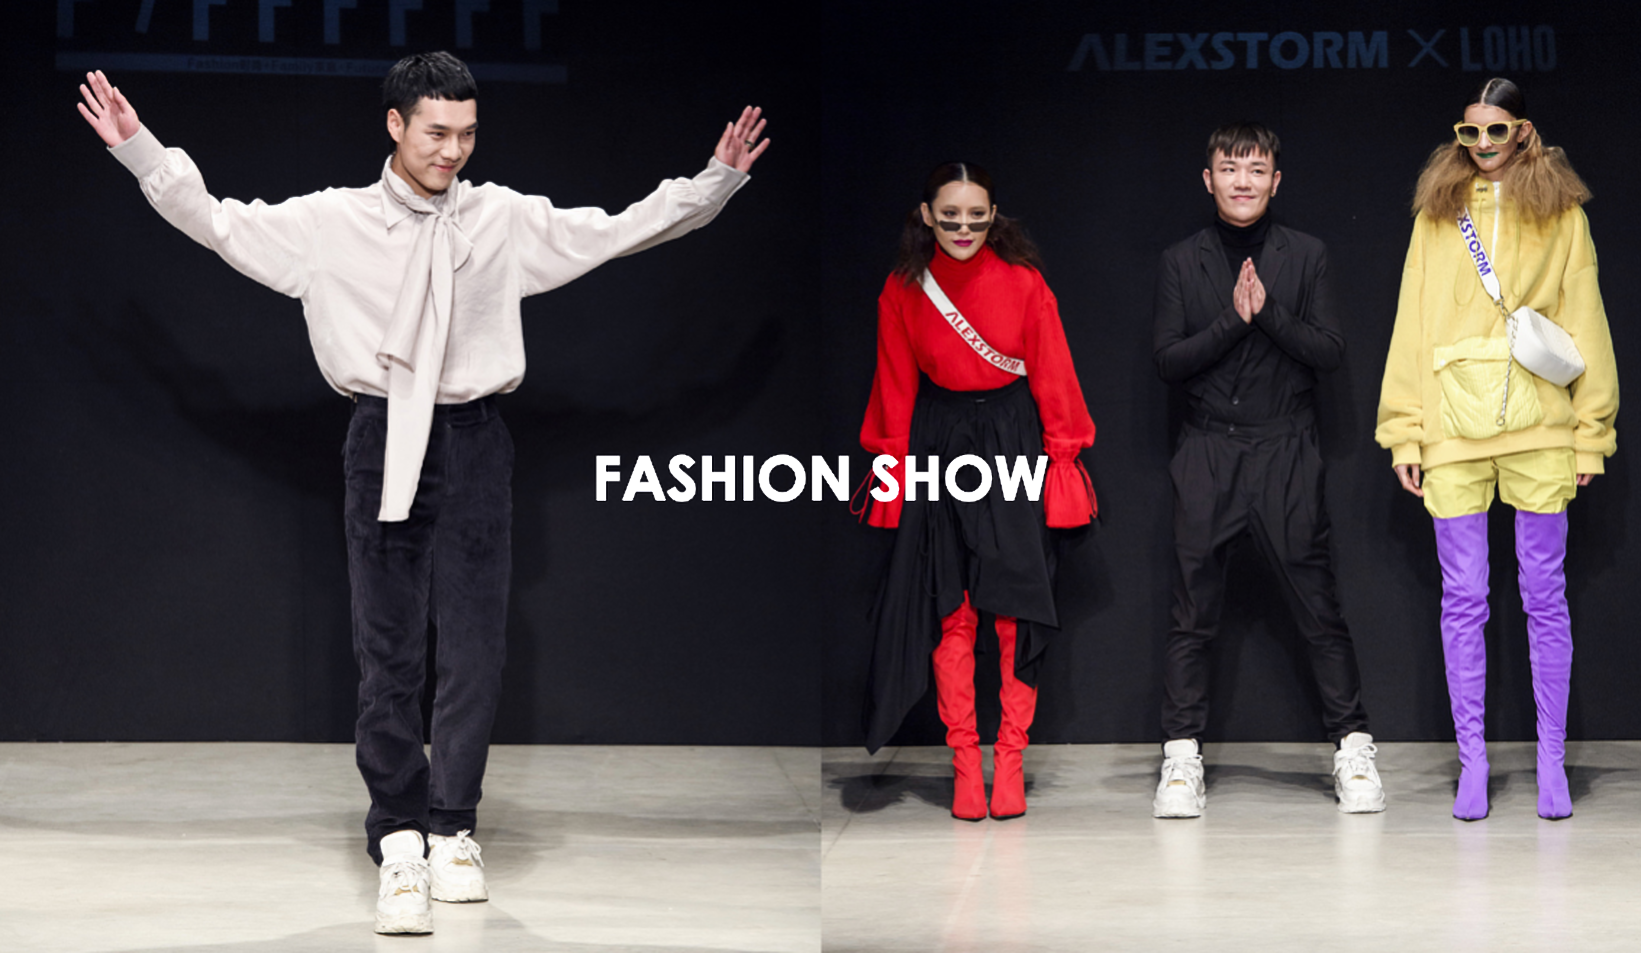 Chinese designer brands Alexstorm and F/FFFFFF at Milan Fashion Week 2019. Photo: The National Chamber for Italian Fashion official website